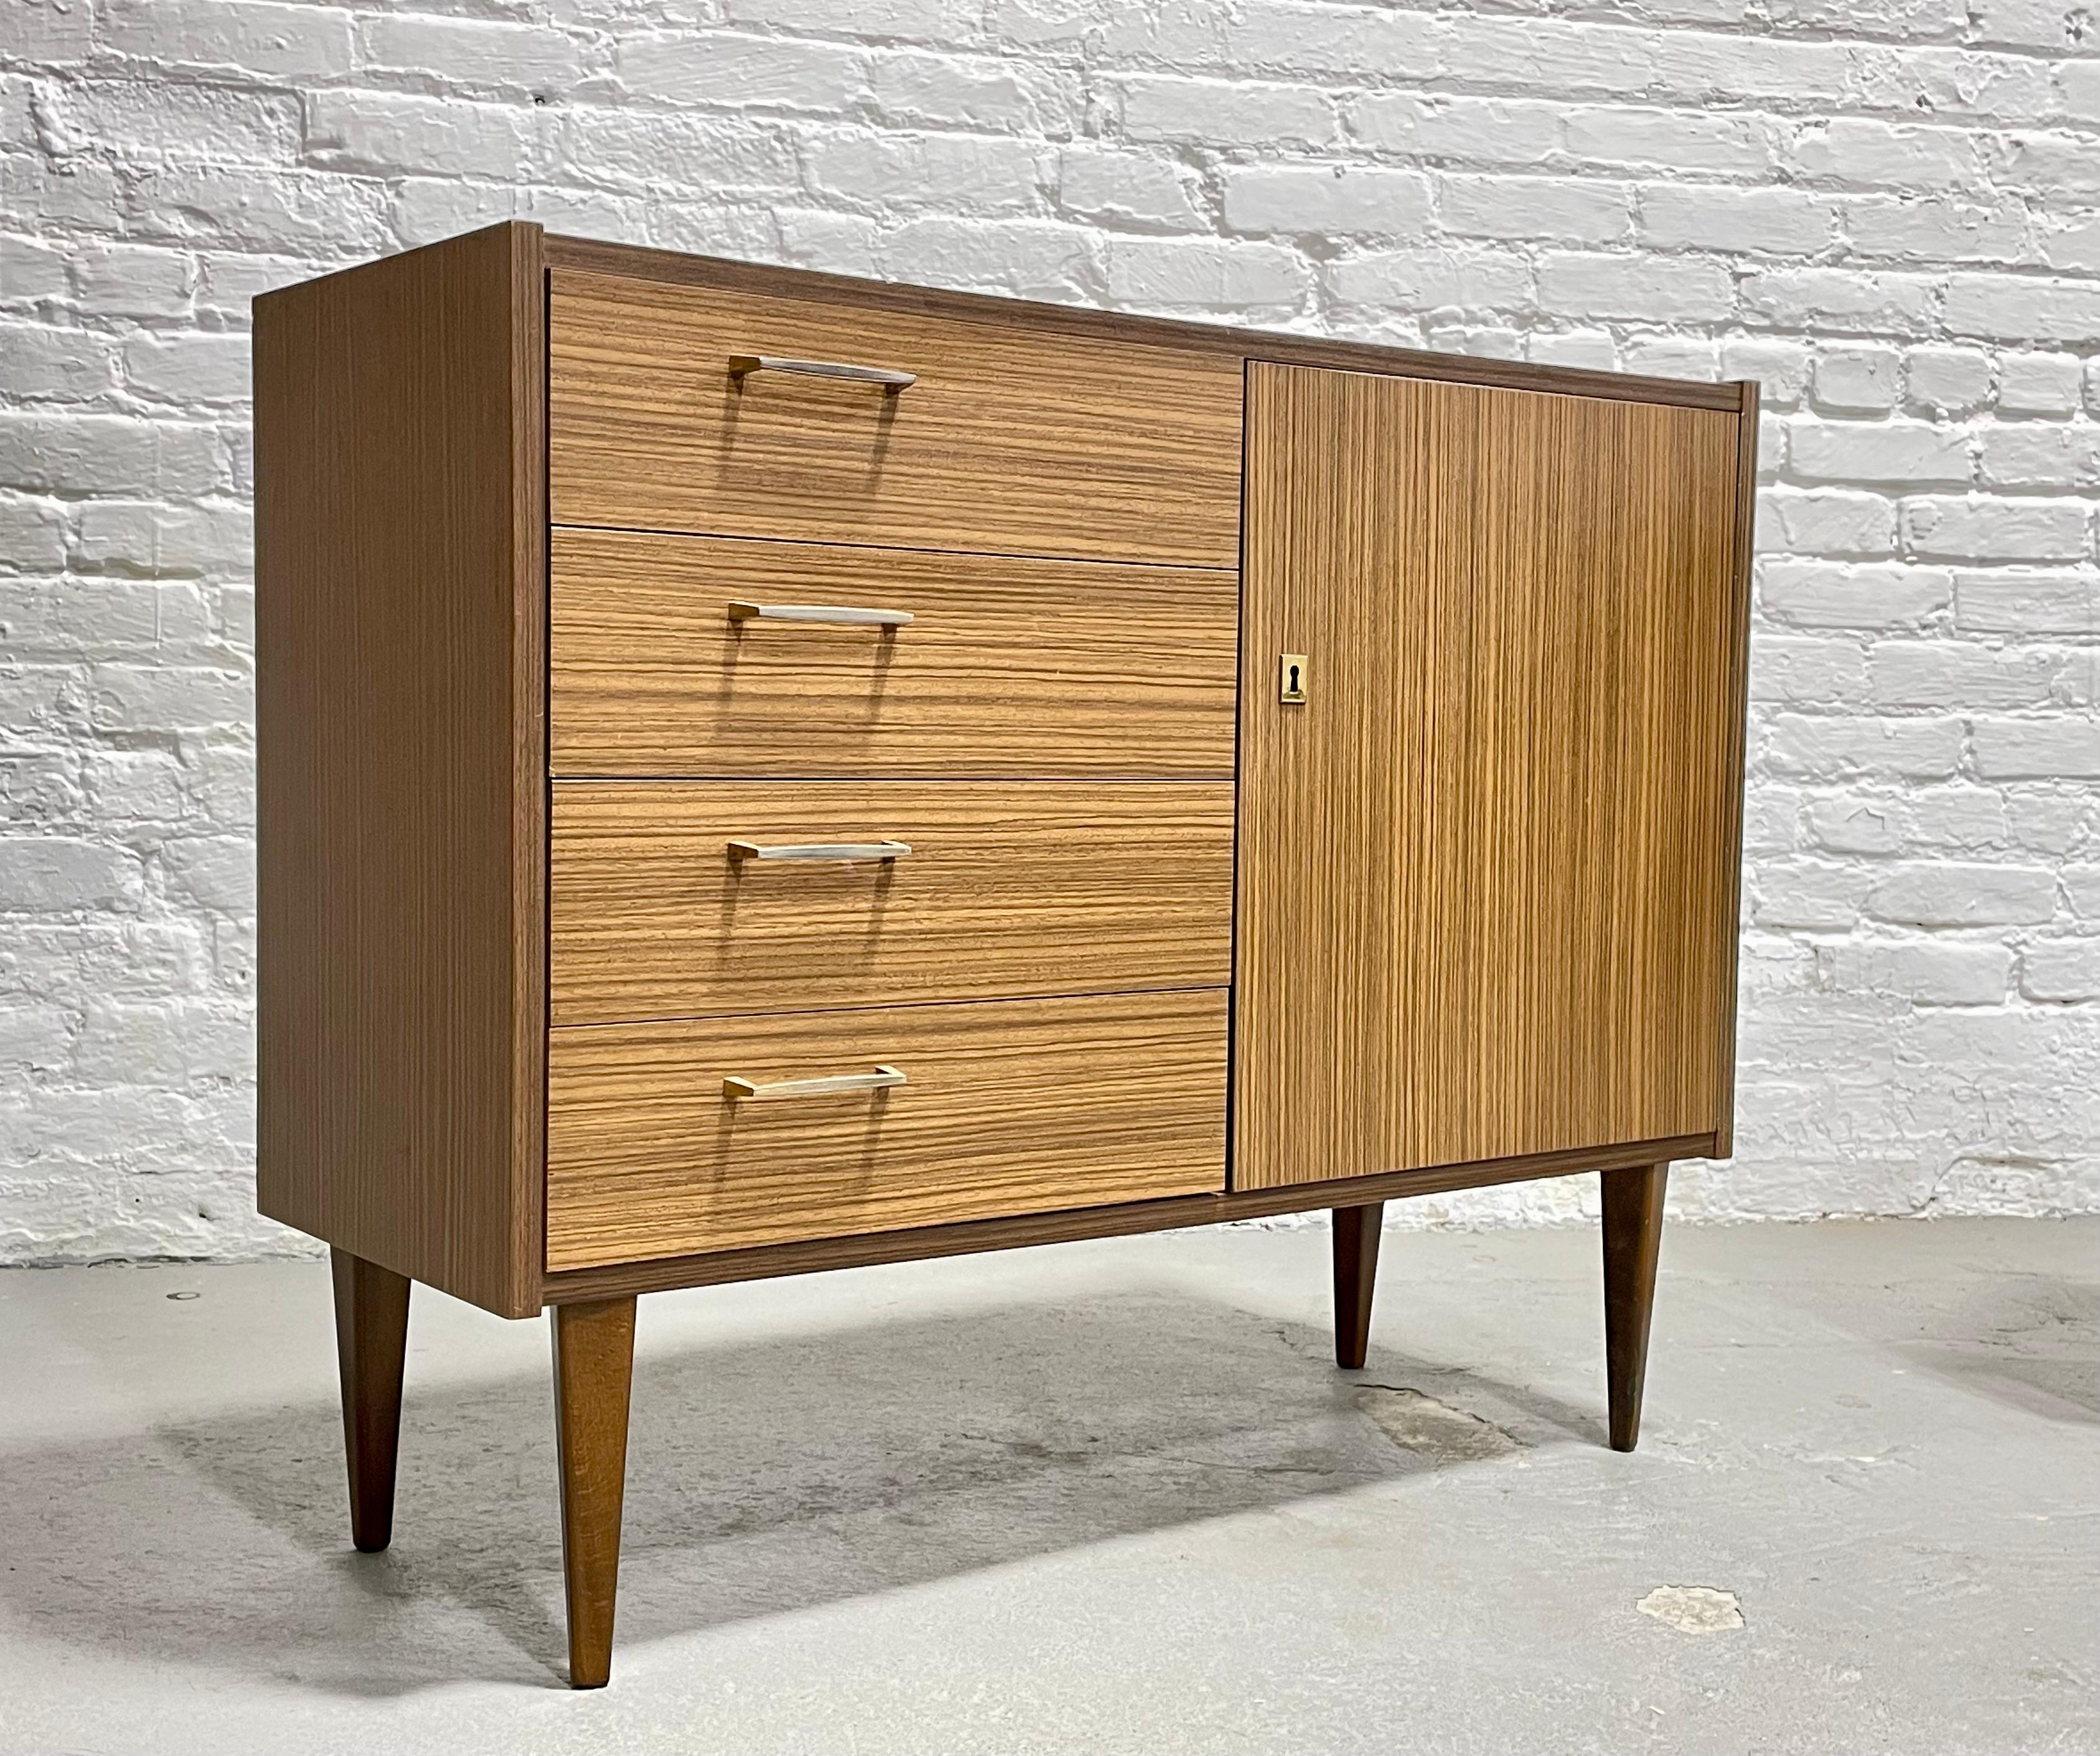 PAIR Mid Century MODERN Laminate CREDENZAS/ Cabinets, Made in Germany, c. 1960's For Sale 4